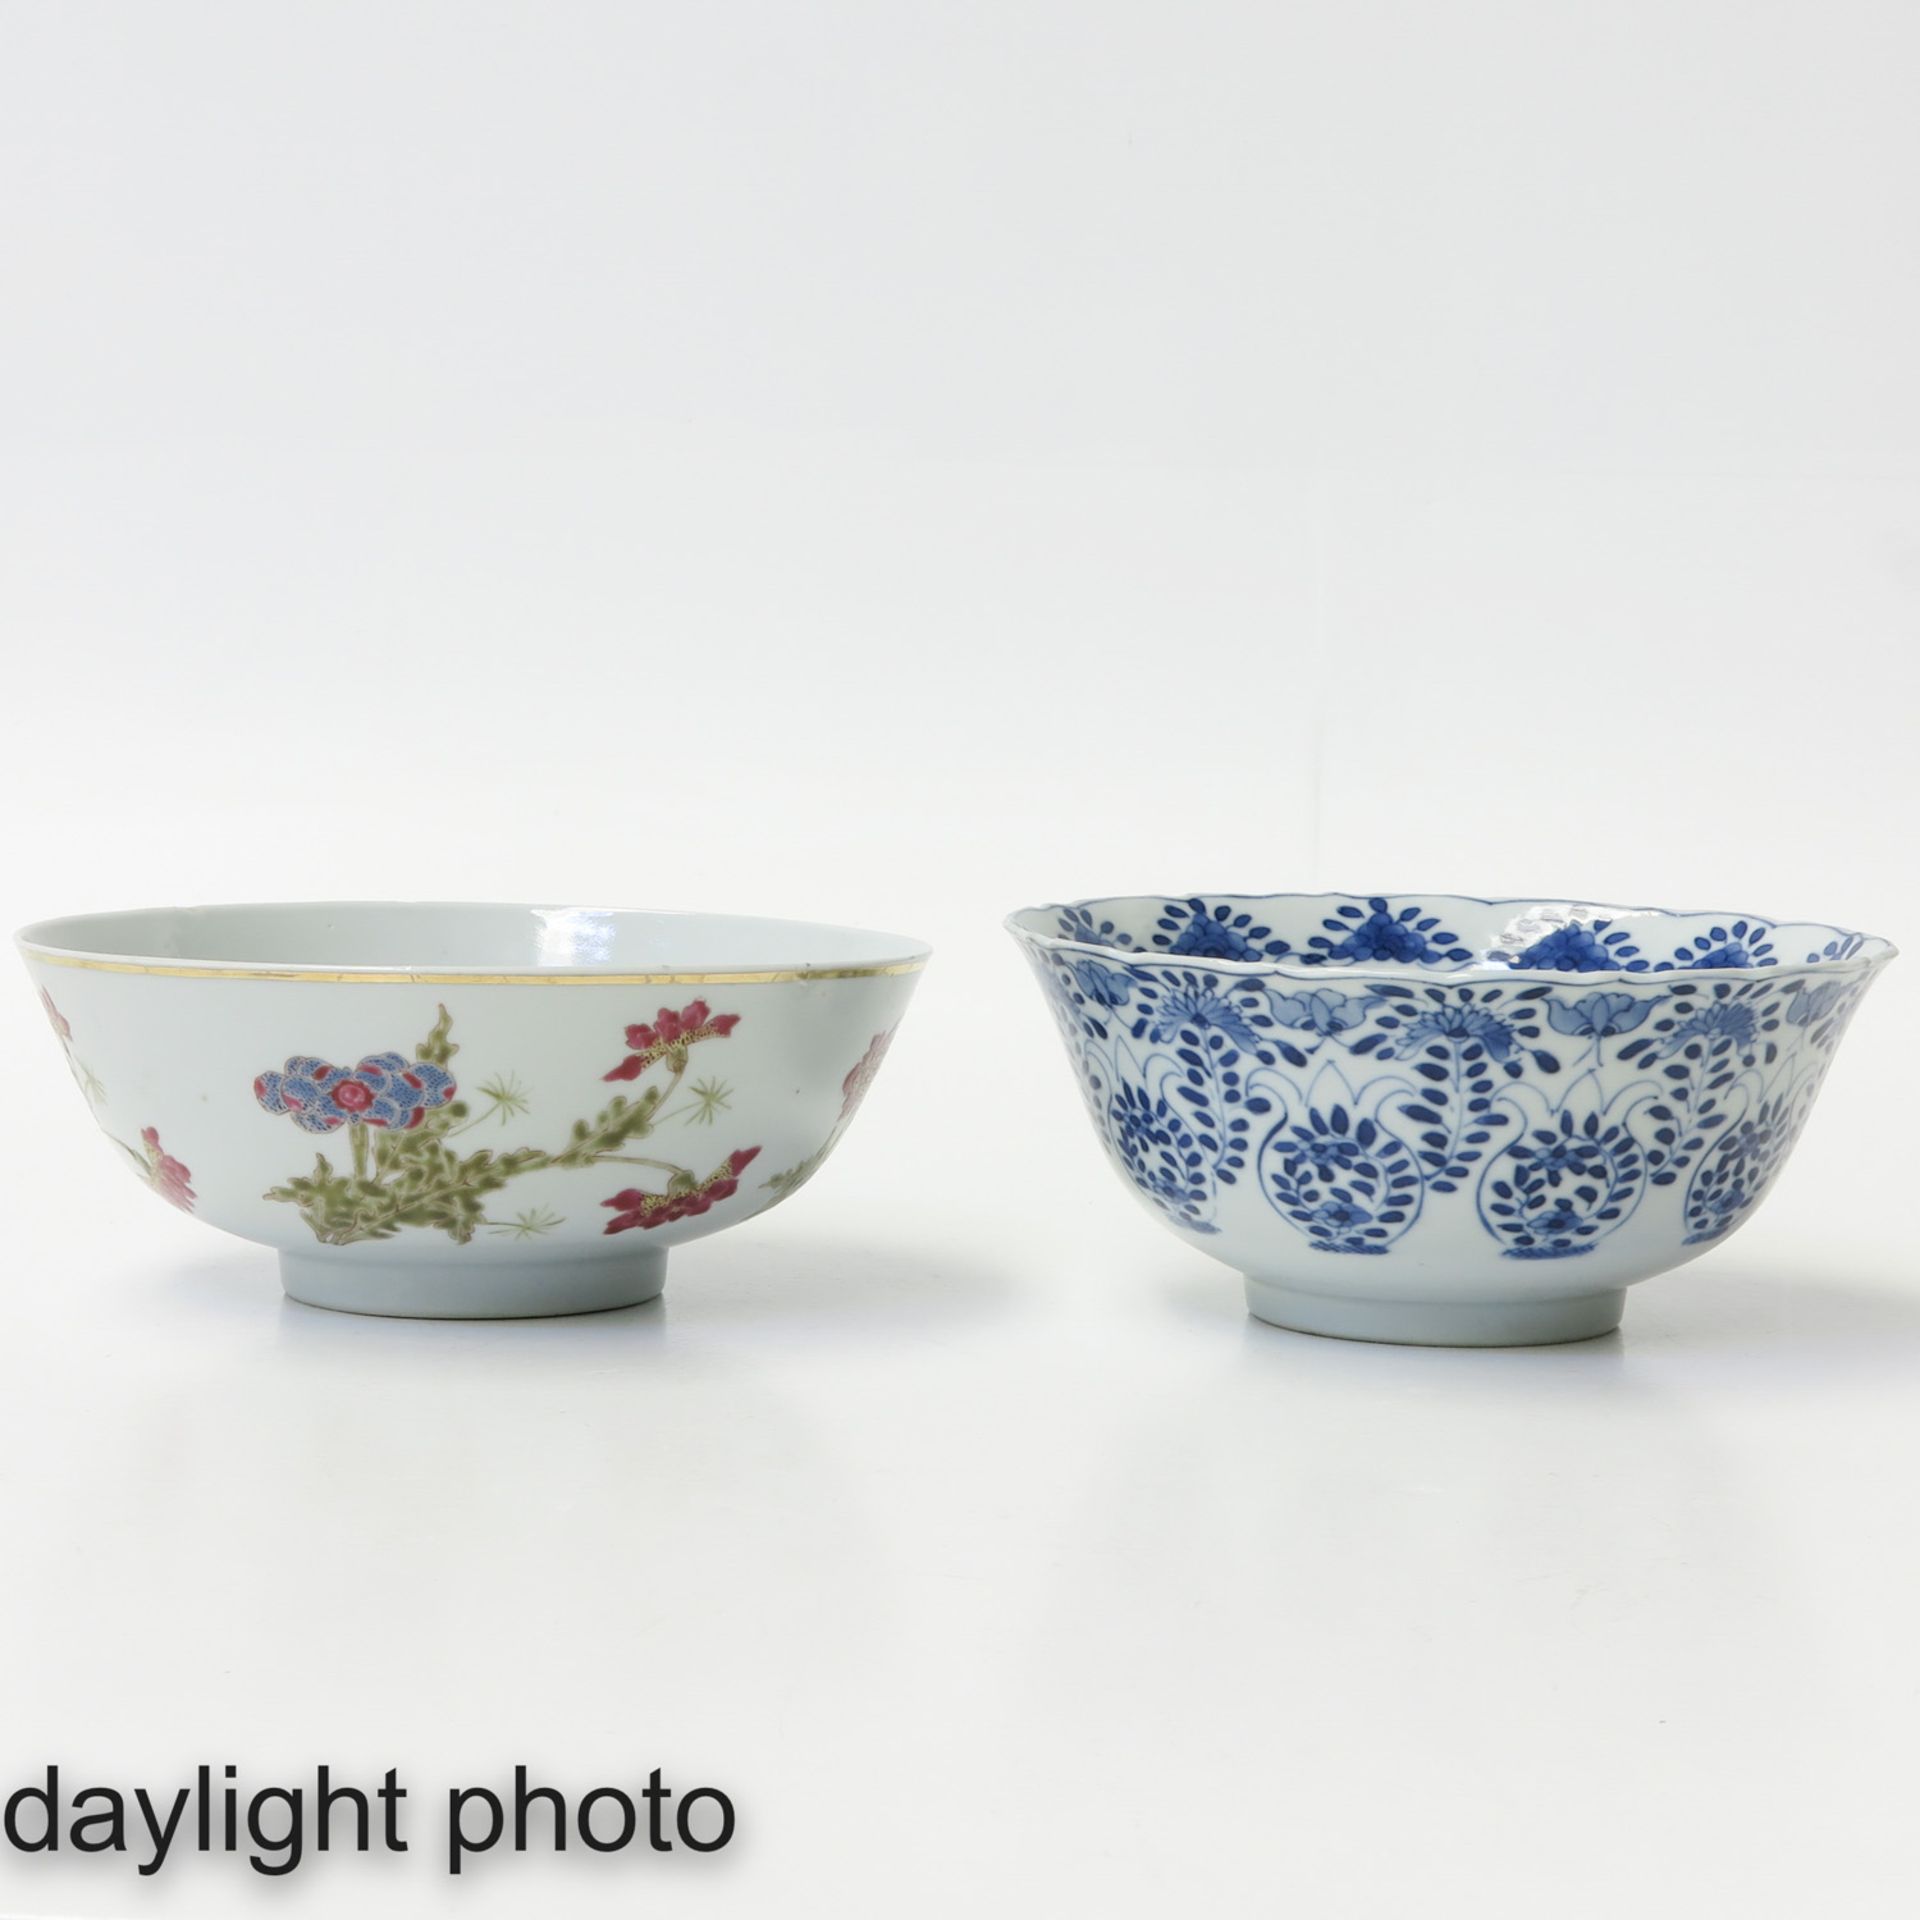 A Lot of 2 Bowls - Image 7 of 10